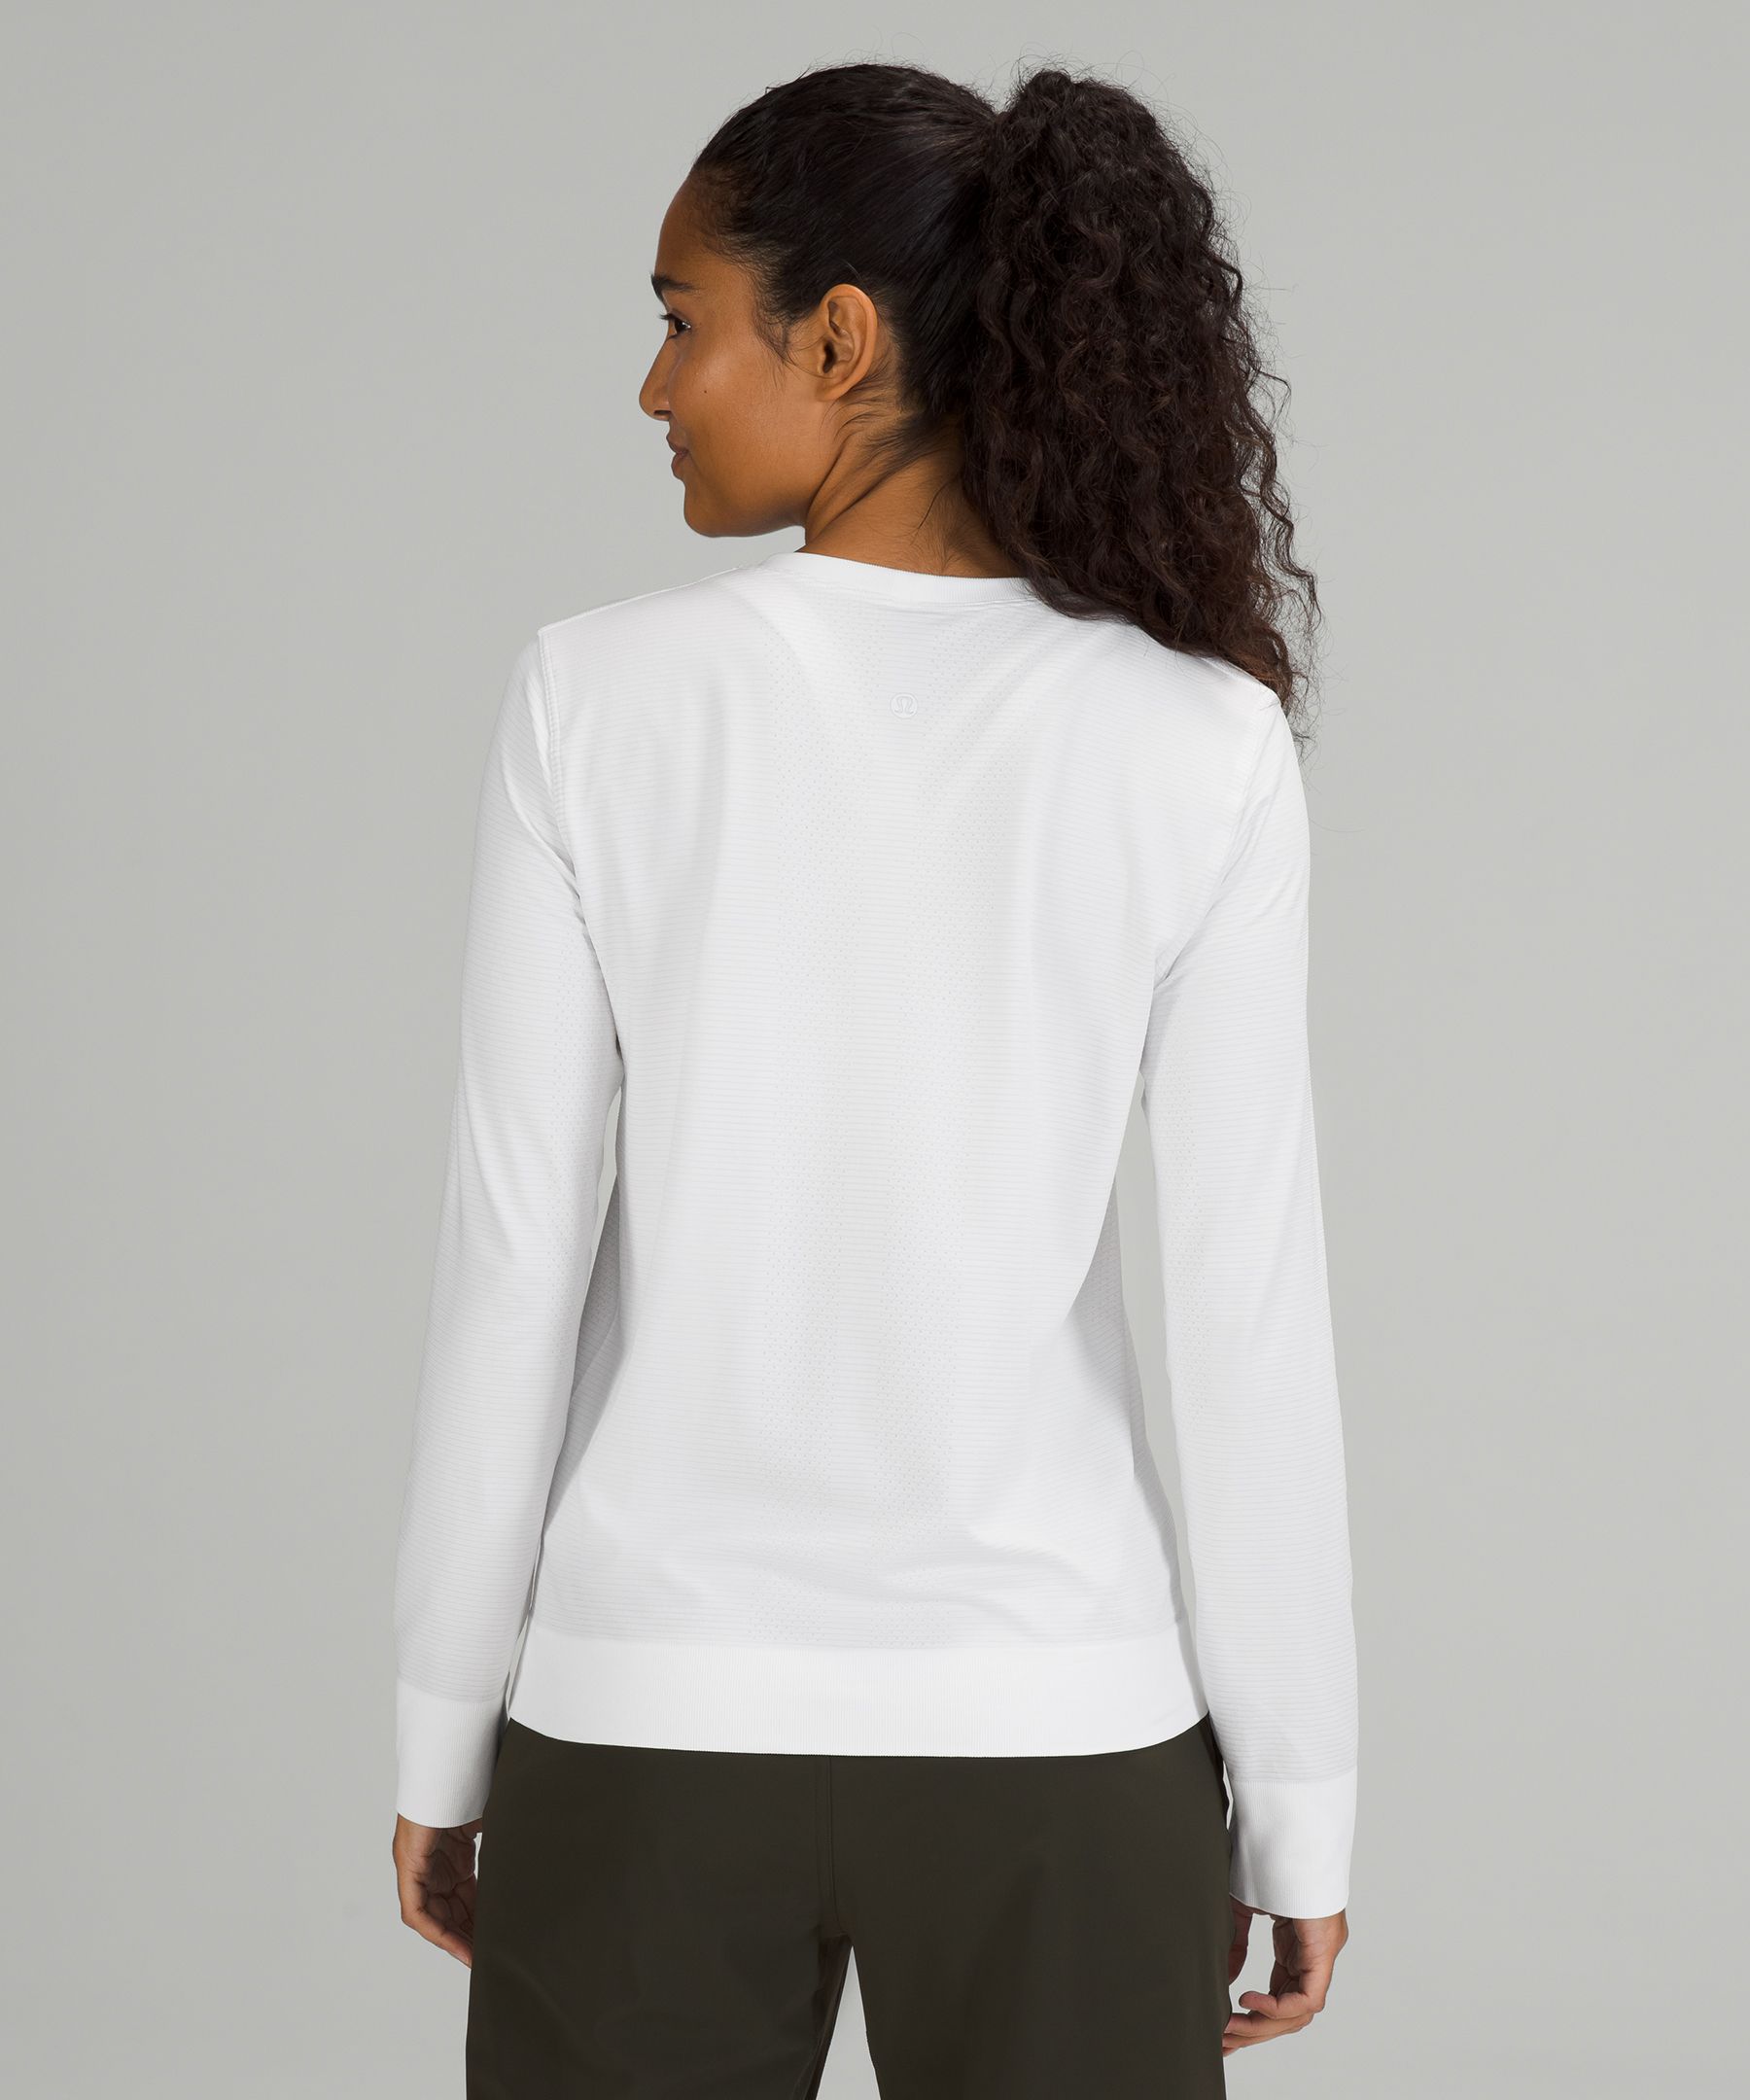 Swiftly Breathe Relaxed-Fit Long Sleeve Shirt, Women's Long Sleeve Shirts